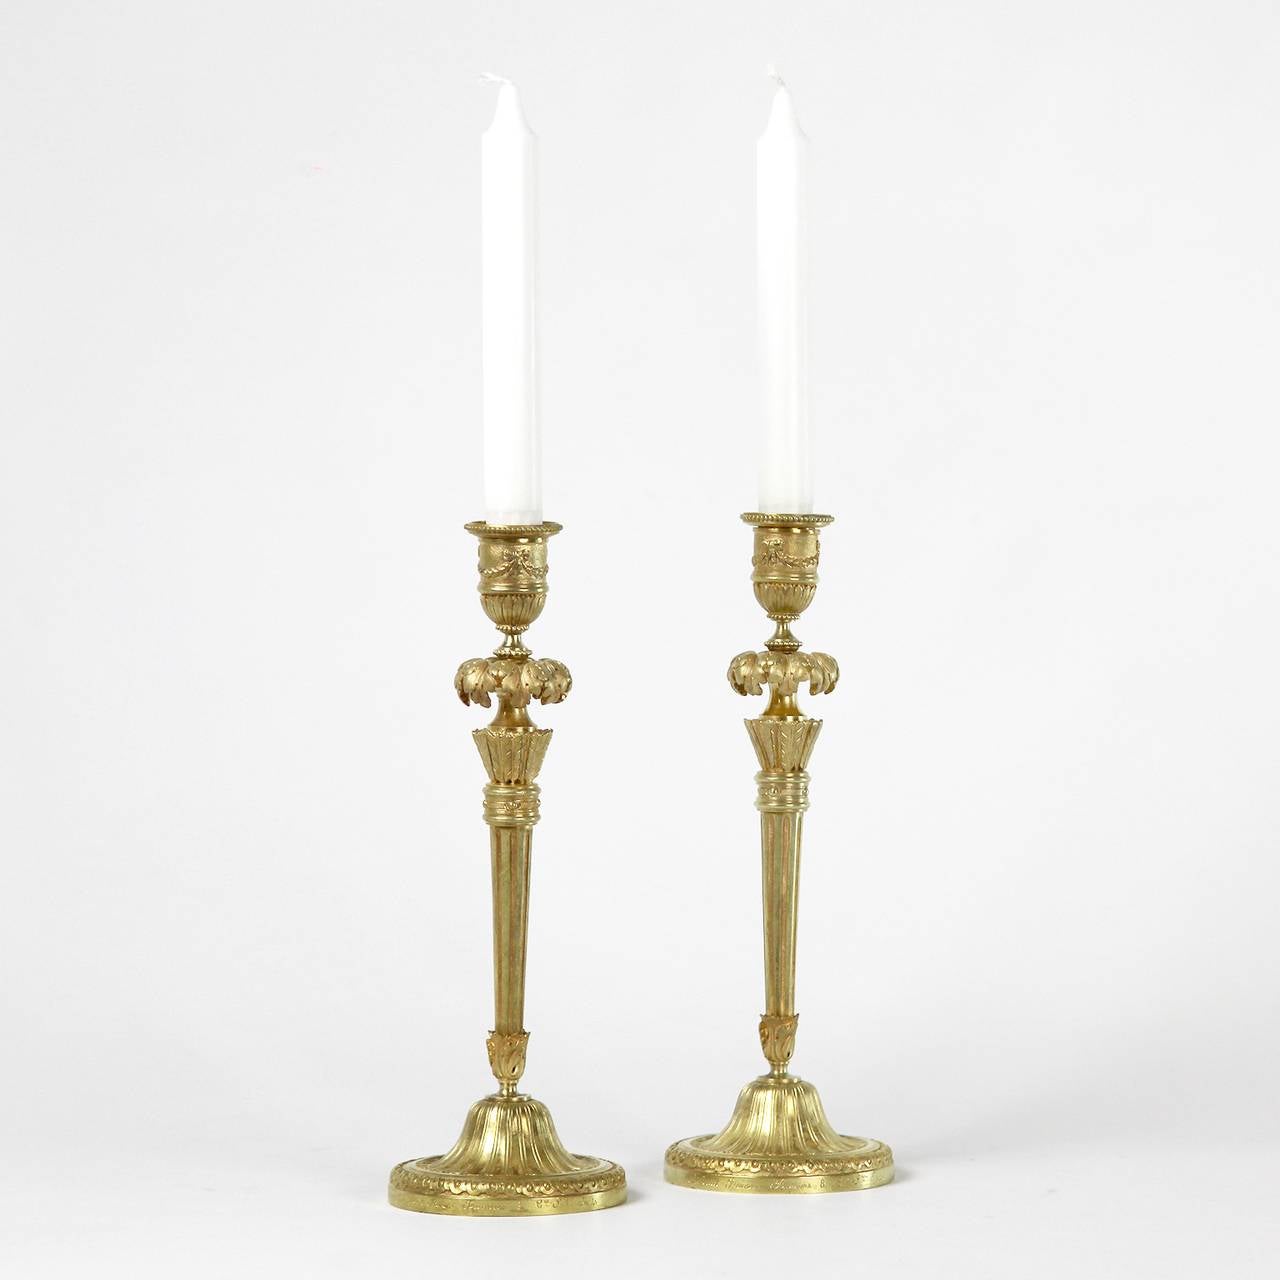 A pair of gilt bronze candlesticks inscribed 'Thiebaut Freres. Fumiere & C S Paris'. Thiébaut Frères was a Parisian foundry of the late 19th century devoted to works of art. 
The pair of gilt-bronze candle sticks in Louis XVI style, the candle